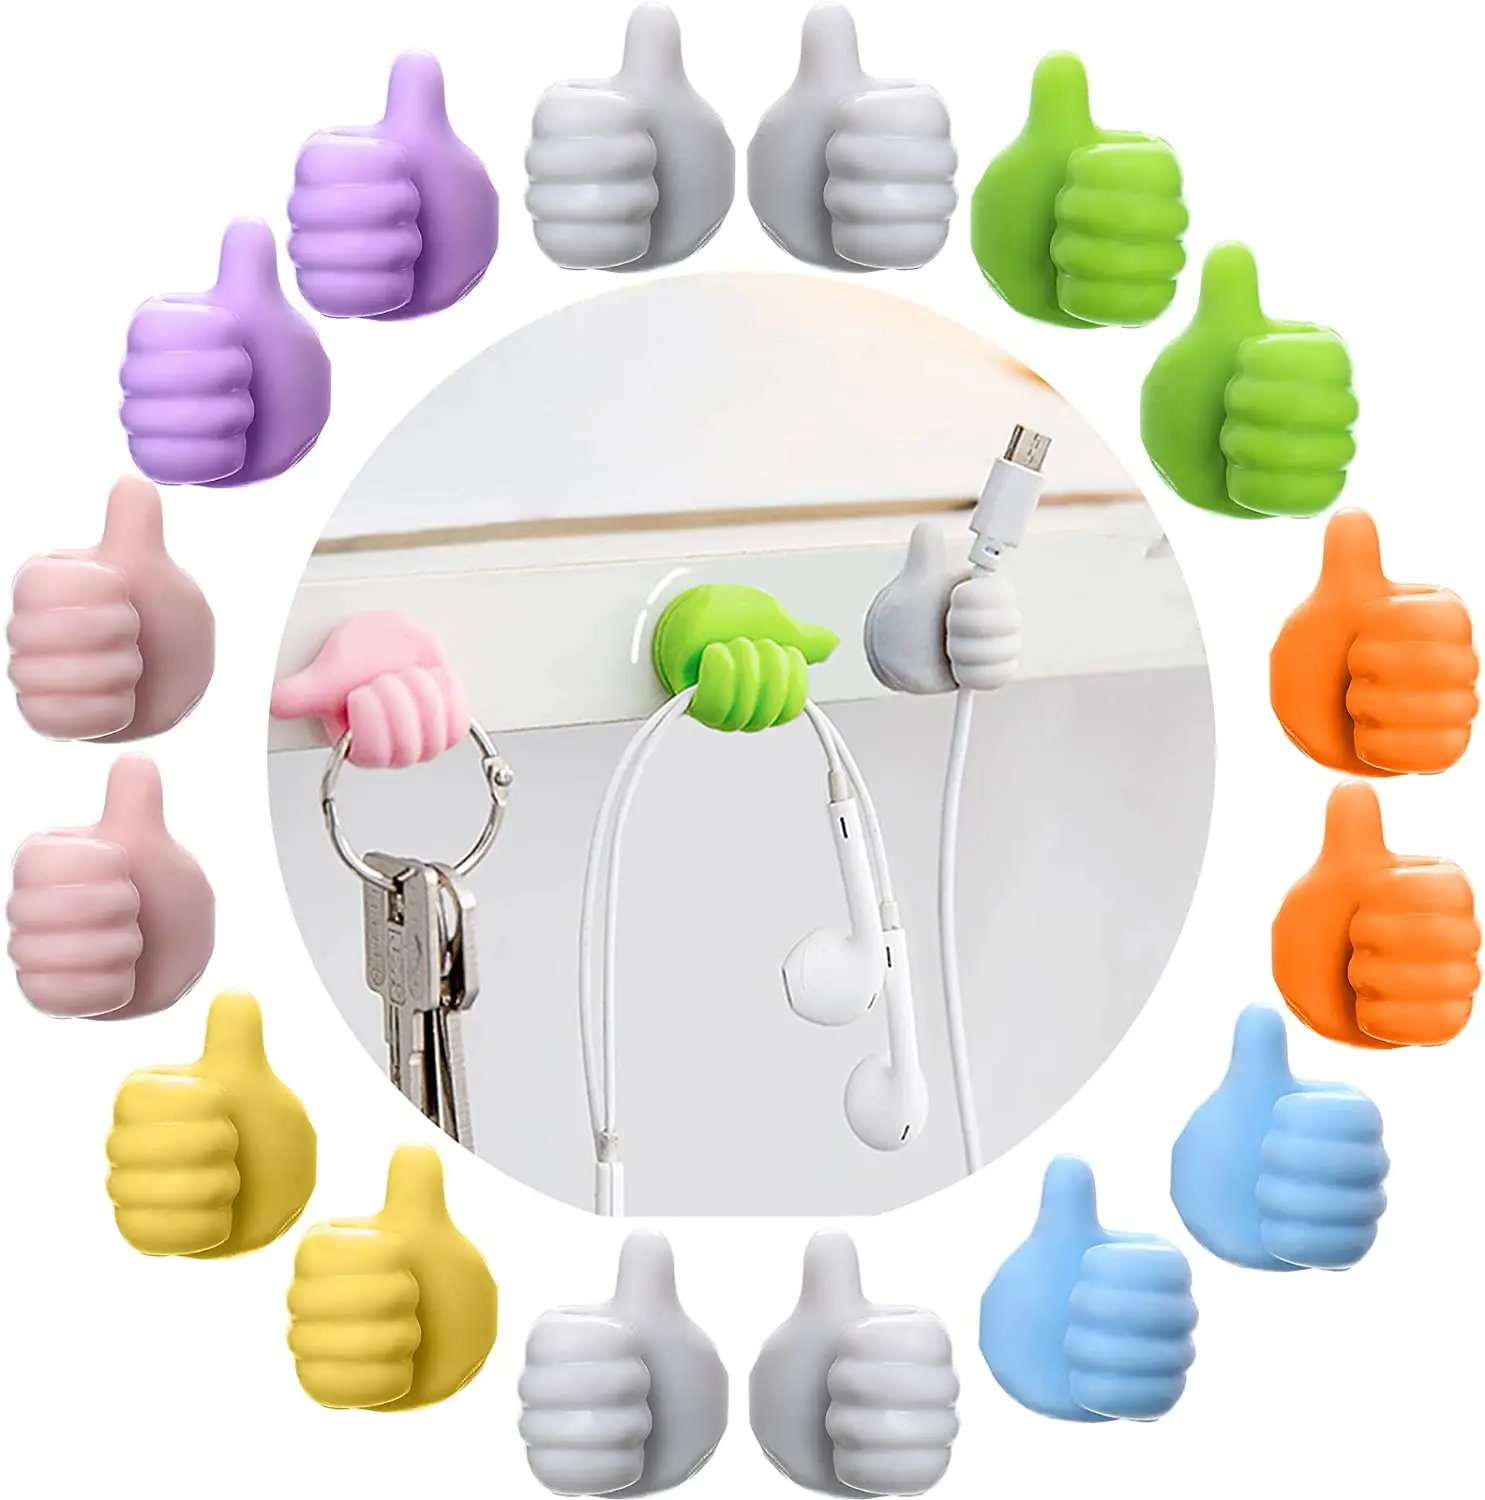 Silicone Thumb Wall Hook - Multifunction Adhesive Cable Clip Self Adhesive Thumb Cable Organizer Clips Key Hanger